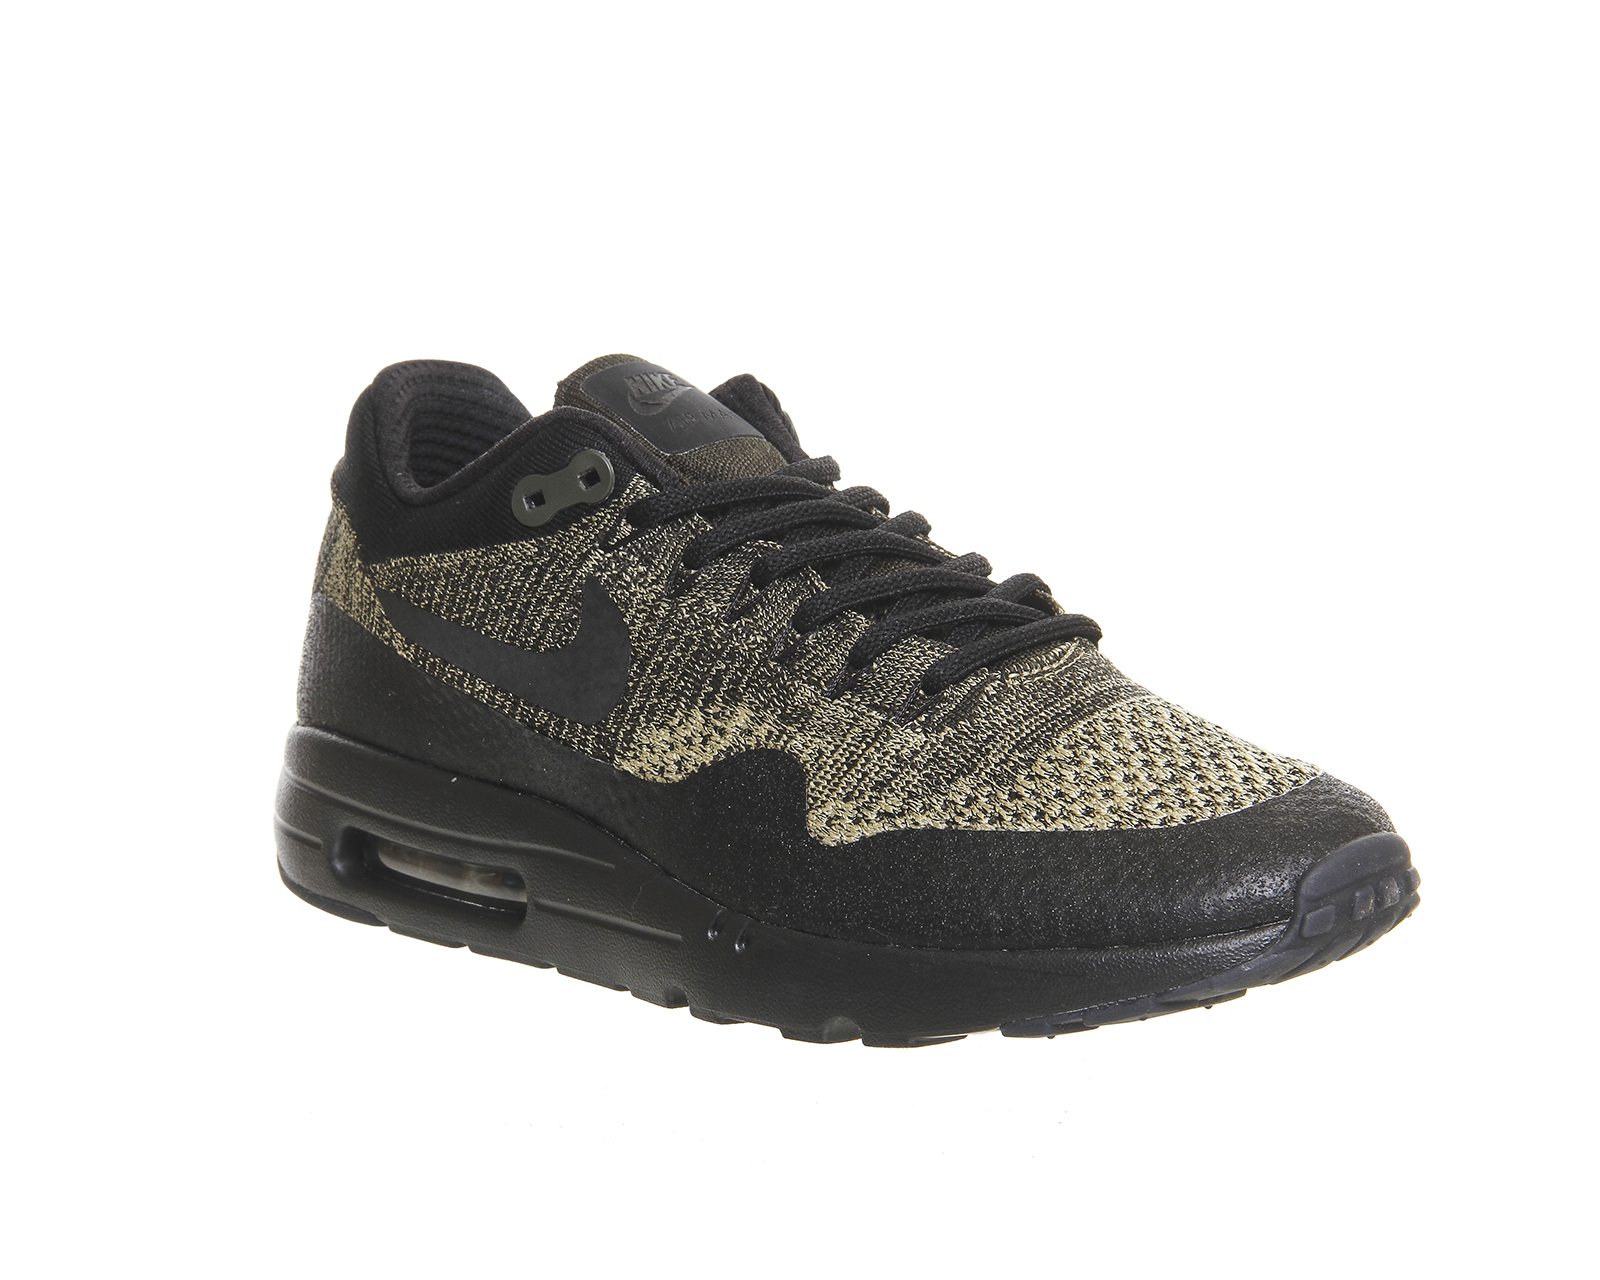 NikeAir Max 1 Flyknit Neutral Olive Black Sequoia